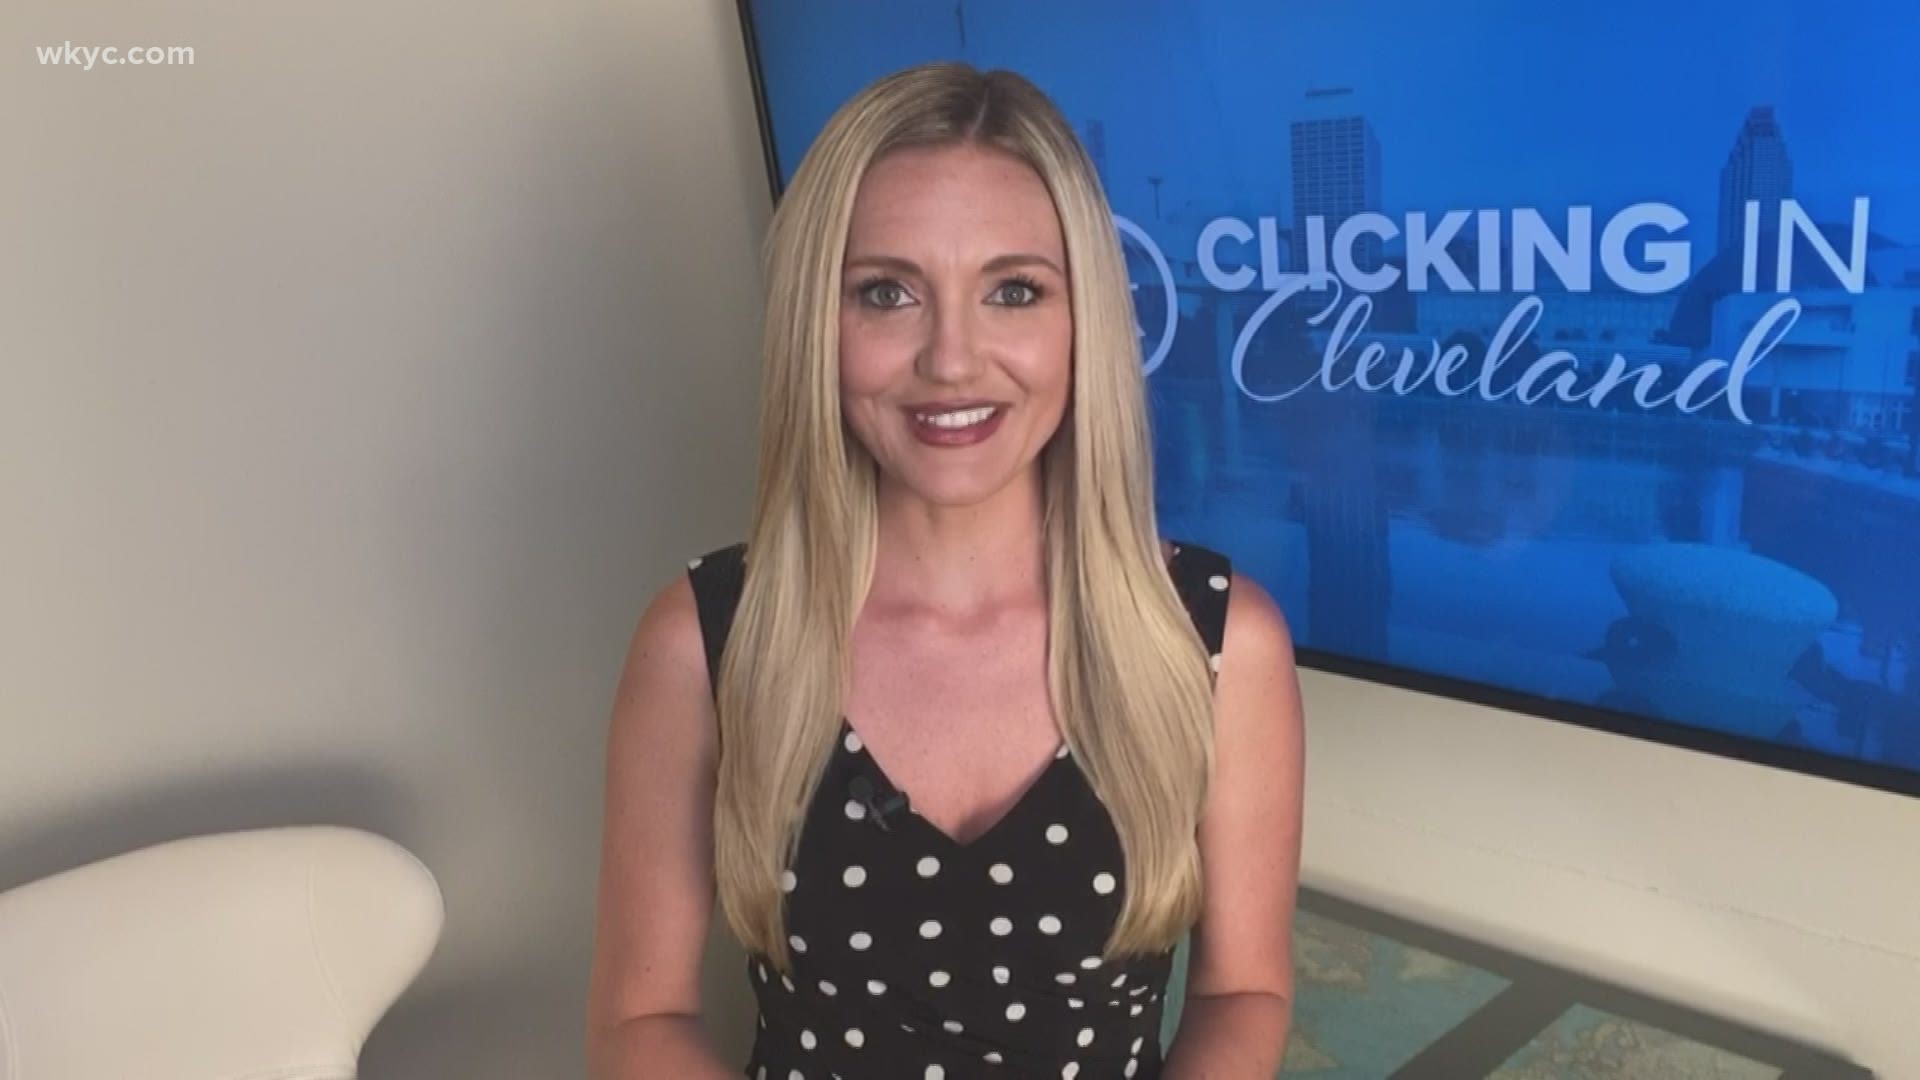 3News Digital Anchor Stephanie Haney tells you what's Clicking in Cleveland.